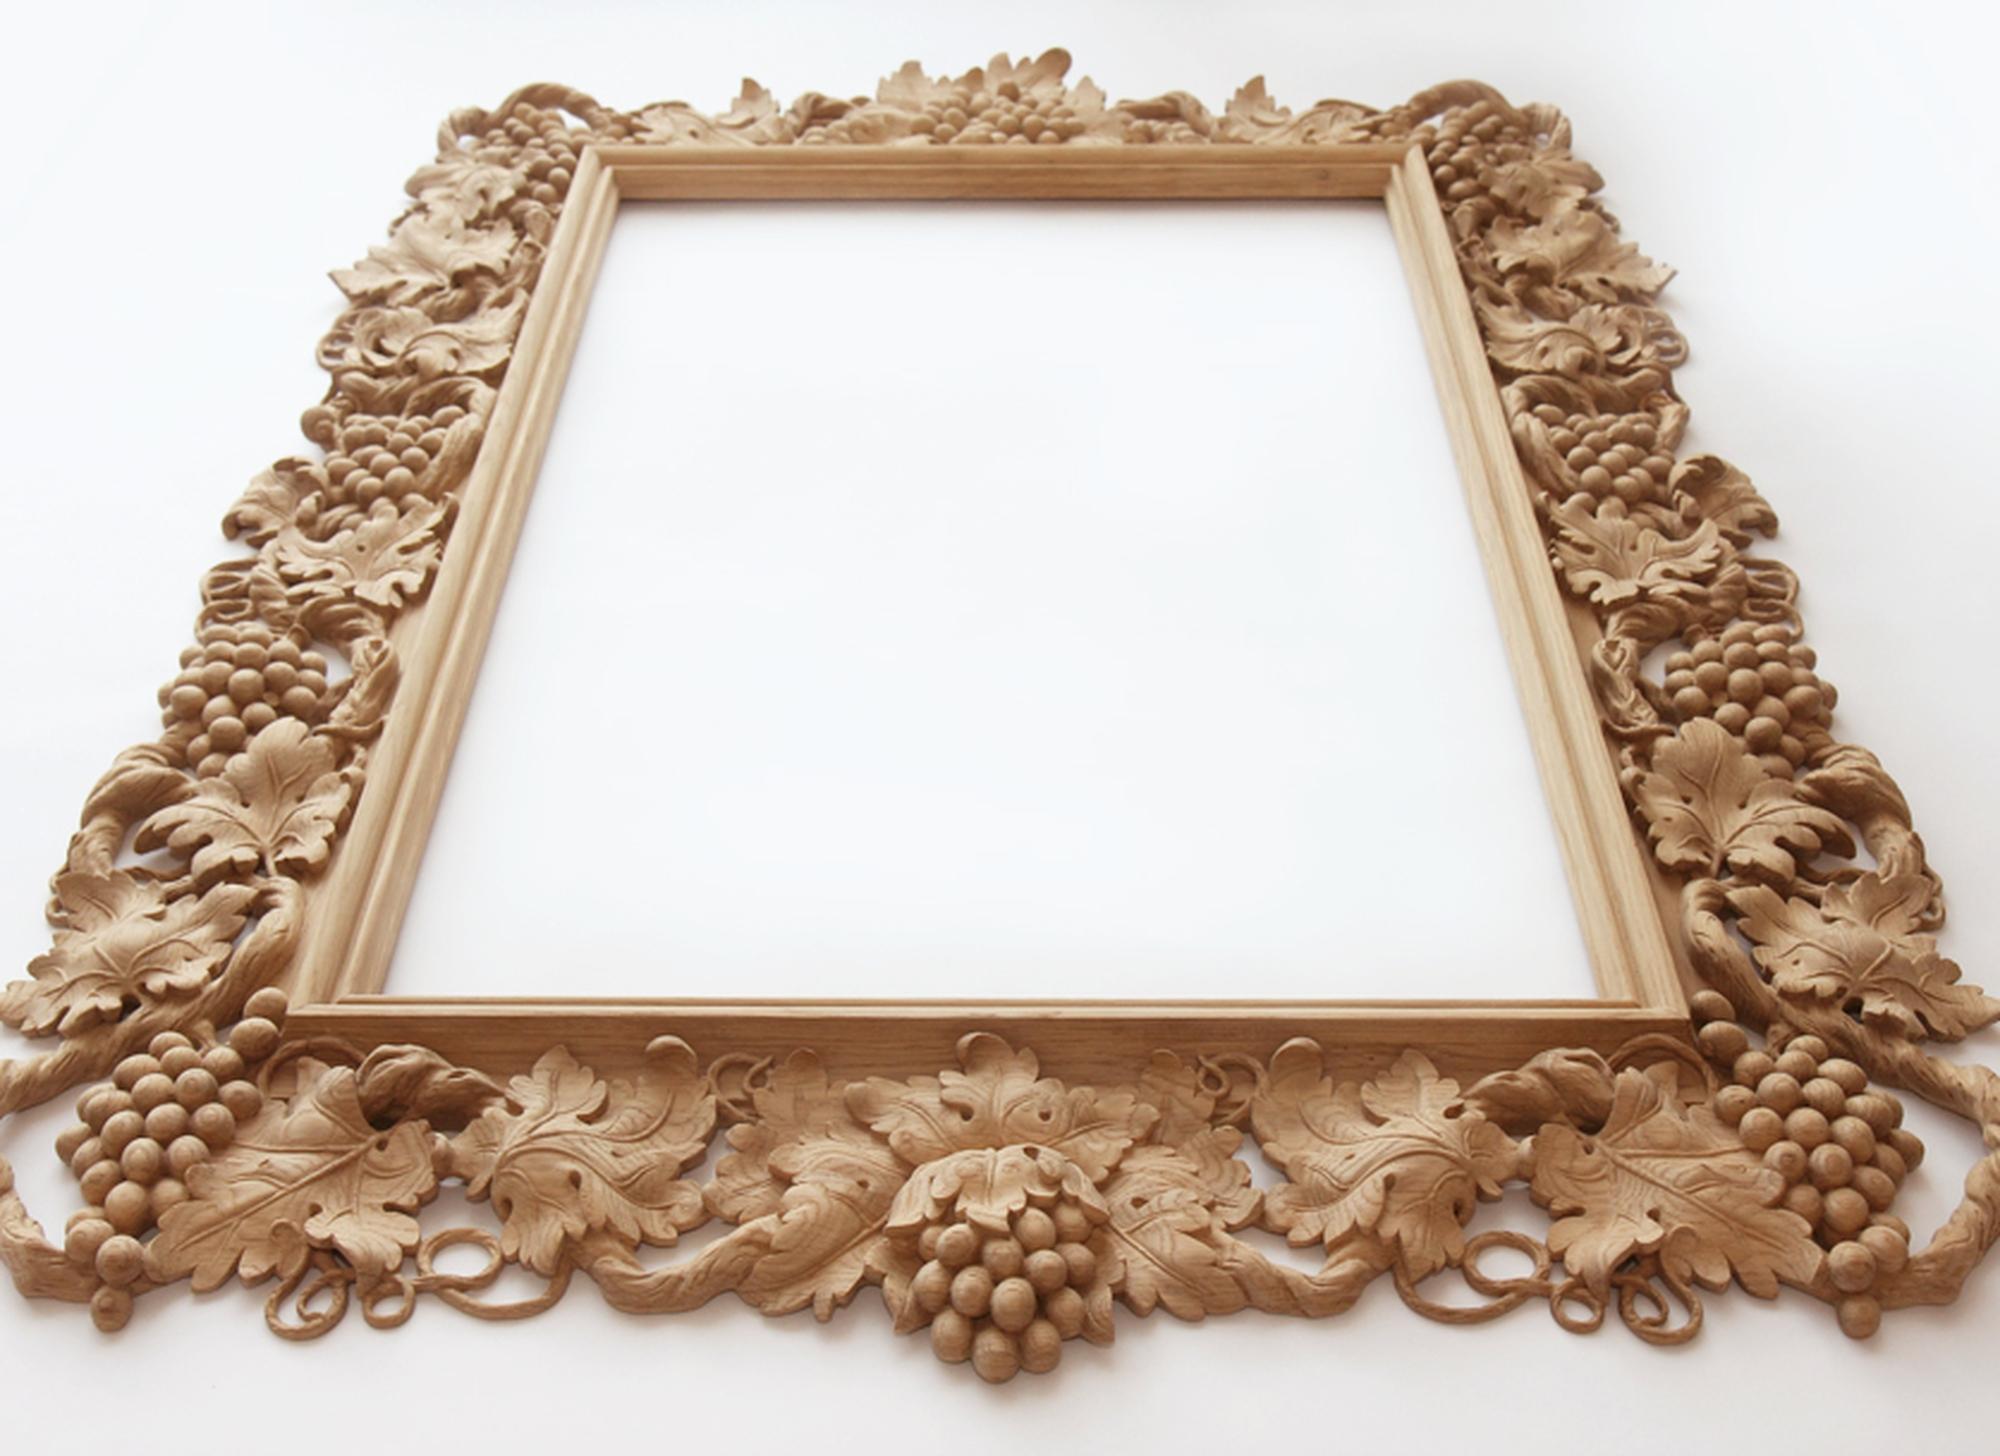 Unfinished High quality wood carving mirror frame from oak or beech of your choice.

>> SKU: RM-013

>> Dimensions  (A x B x C x d x e):

- 52,95